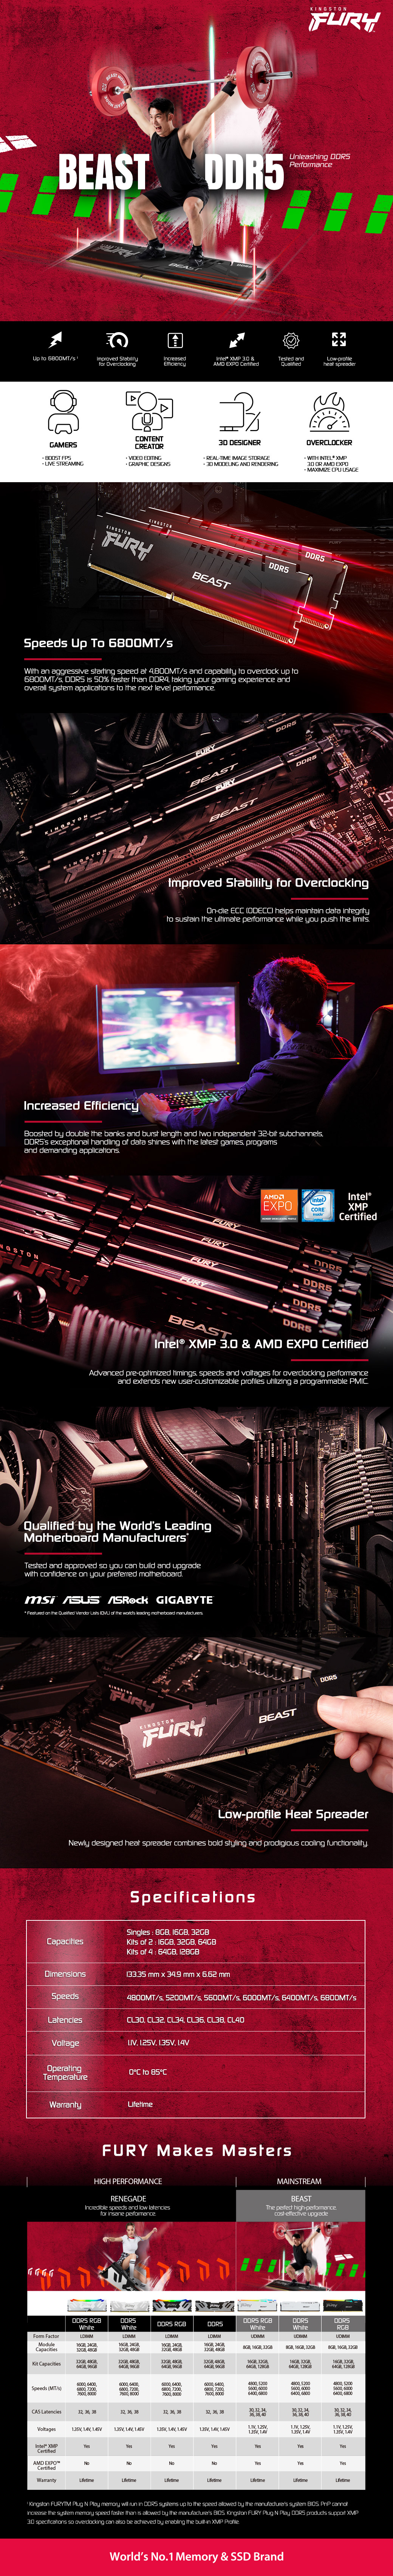 A large marketing image providing additional information about the product Kingston 32GB Kit (2x16GB) DDR5 Fury Beast EXPO/XMP CL34 6800MHz - Additional alt info not provided